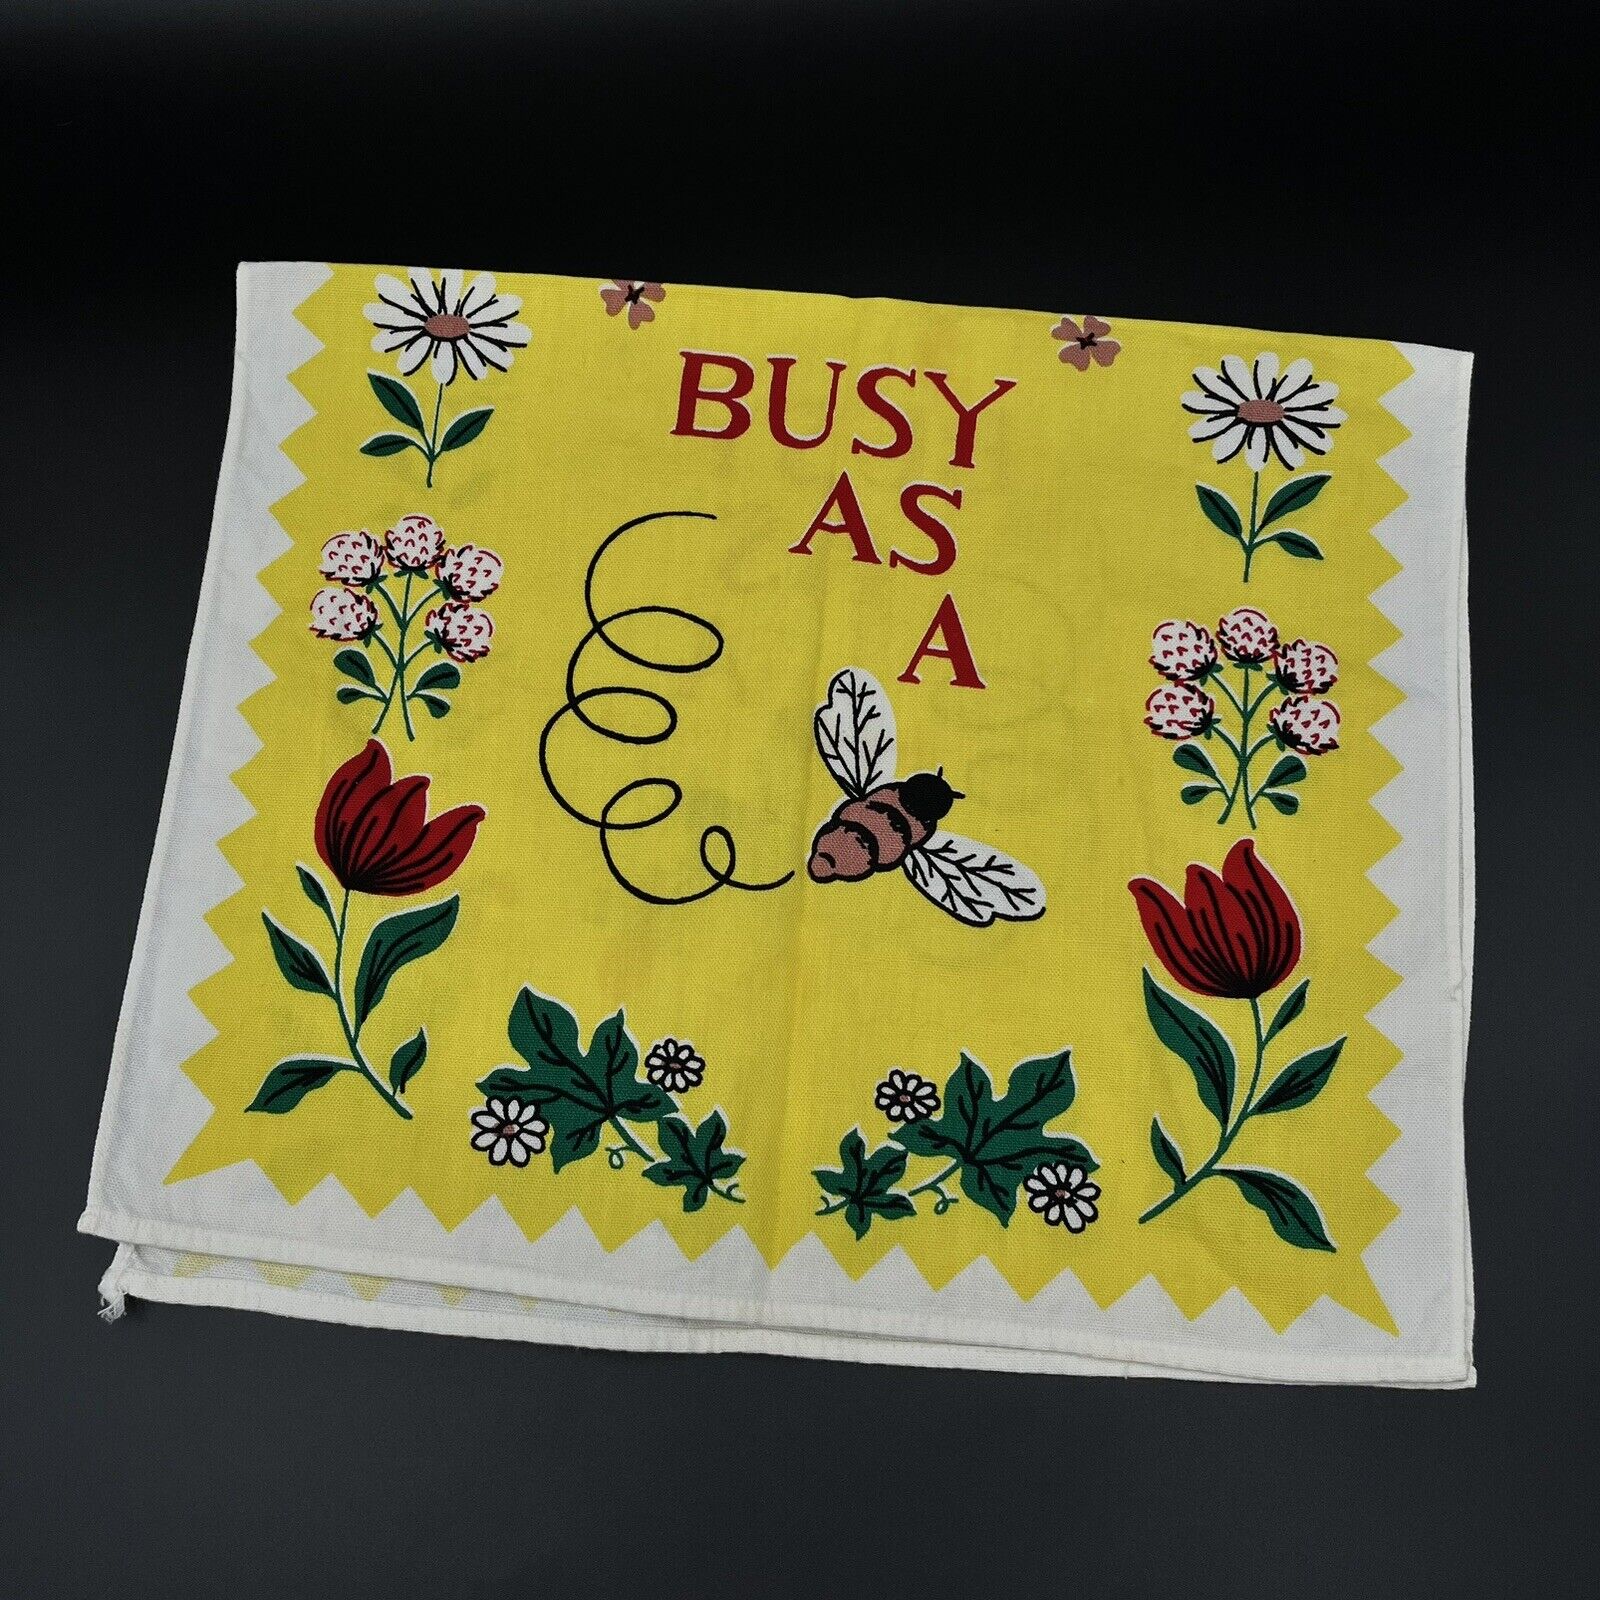 Vintage Retro Busy As A Bee Cotton Tea Towel Bees Flowers